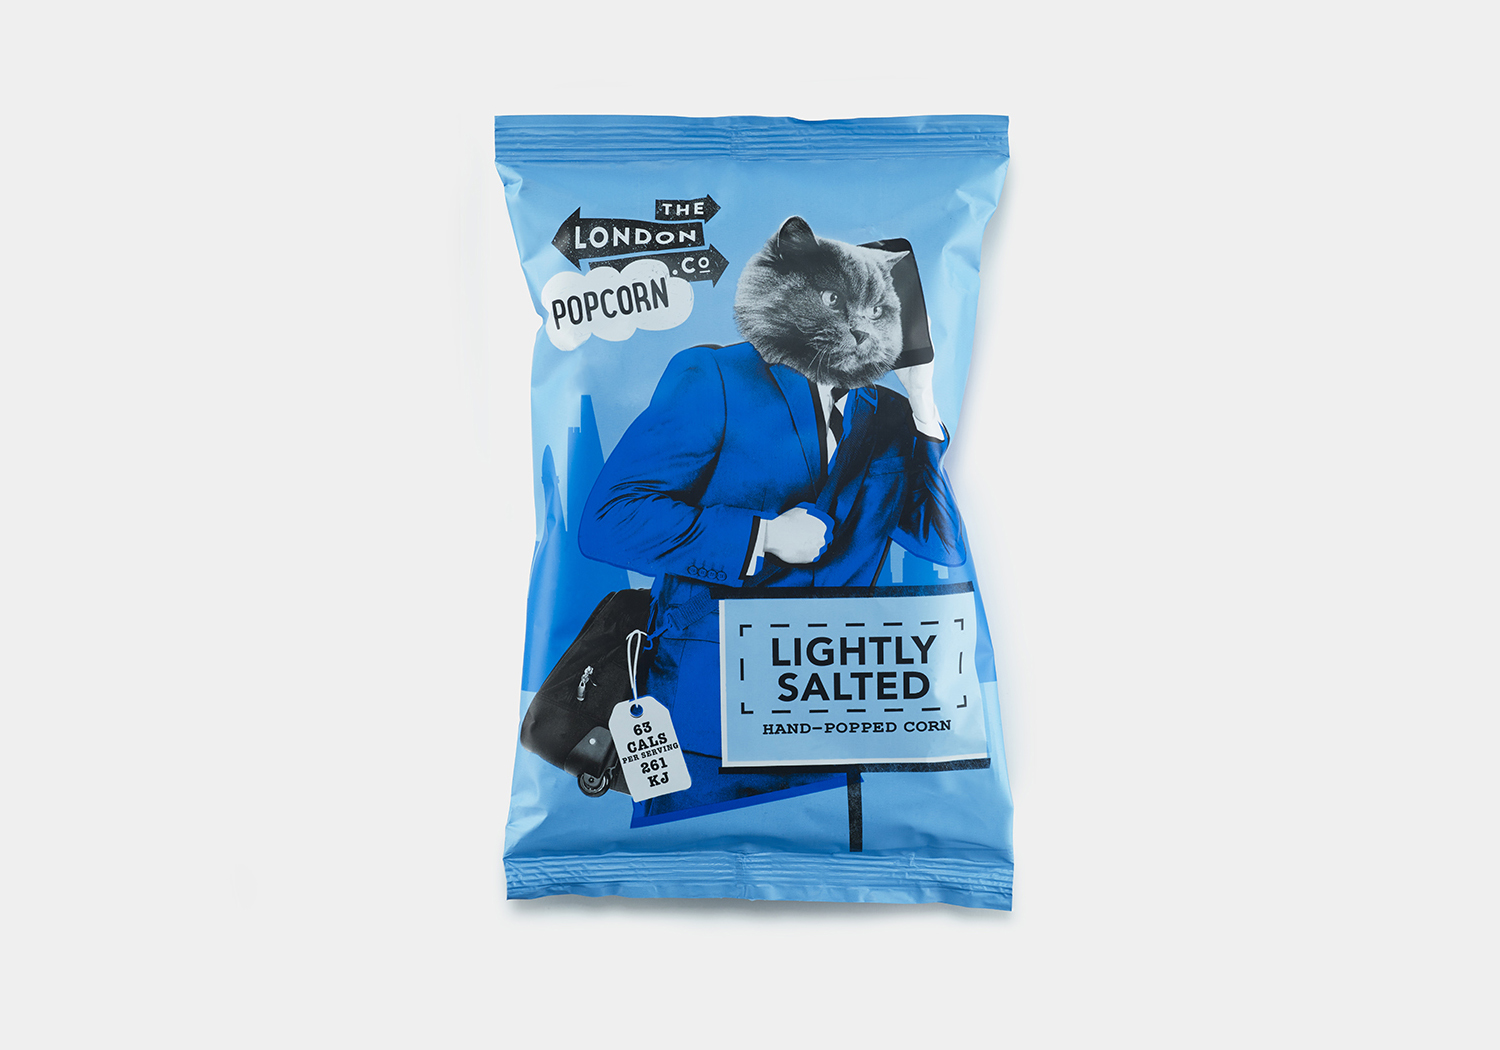 New packaging that mixes photography and illustration designed by UK based B&B Studio for The London Popcorn Co.